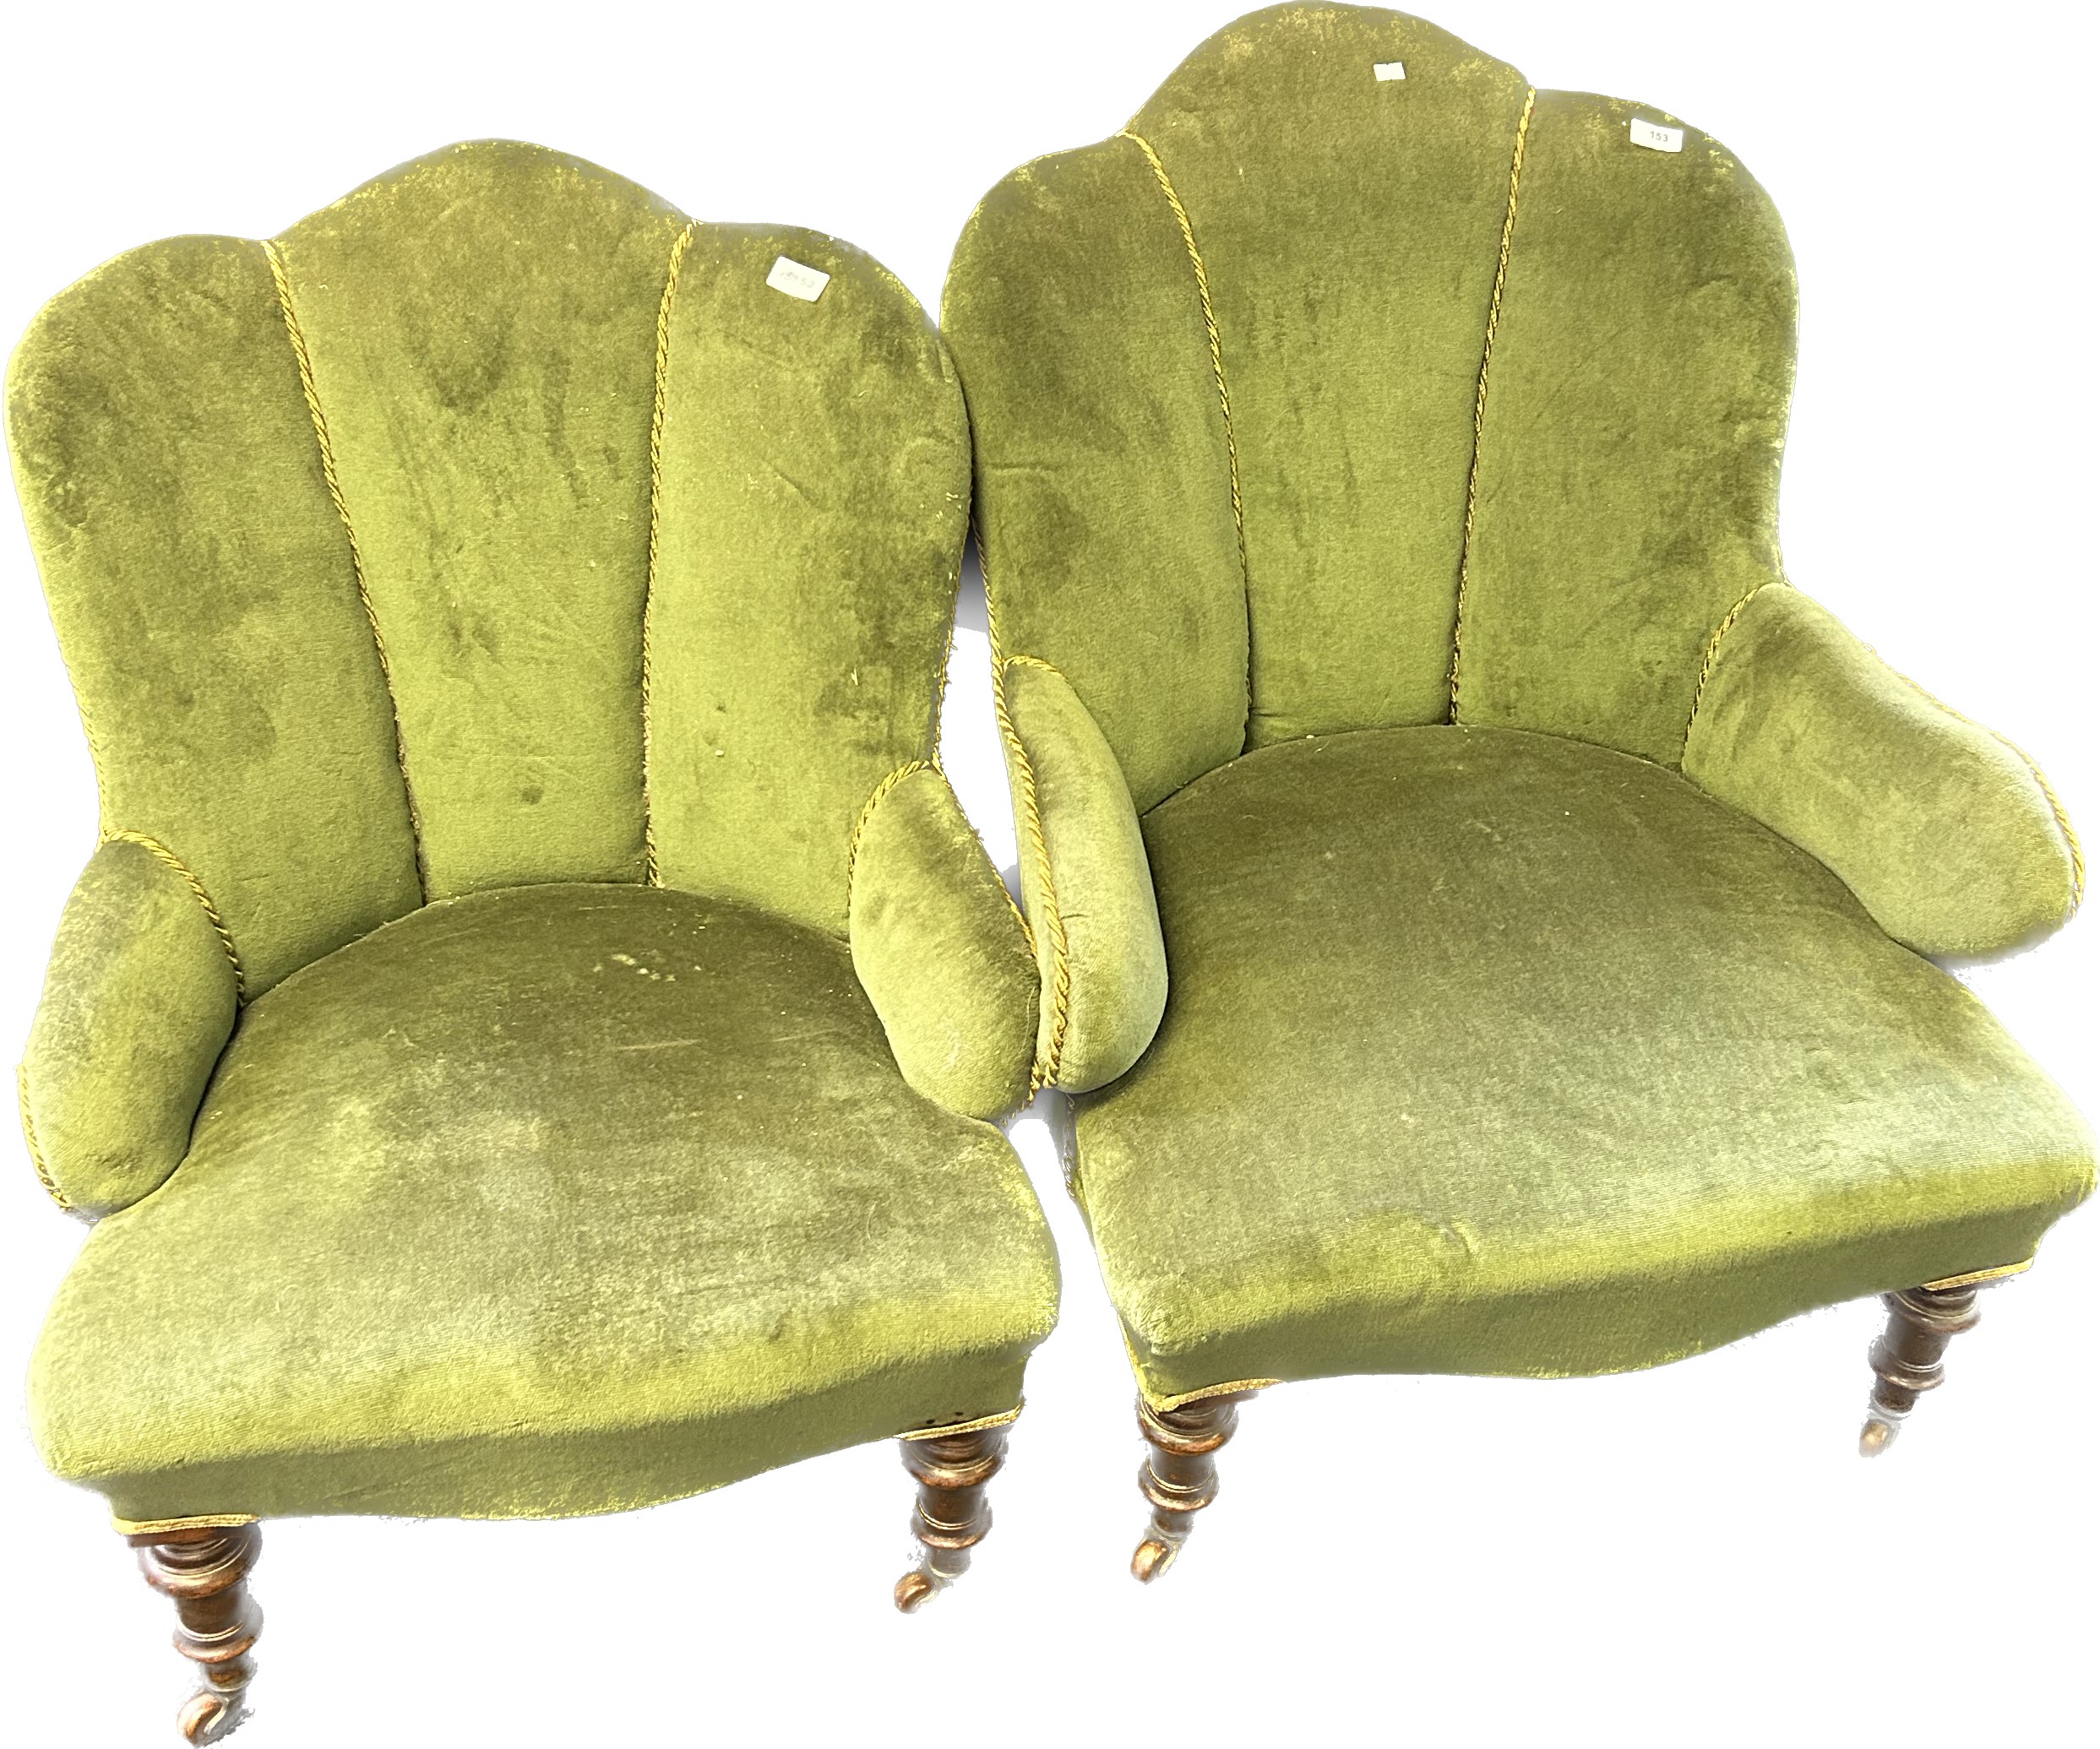 Pair of art deco cushioned chairs, covered in a green upholstery, raised on turned tapered legs - Image 3 of 5